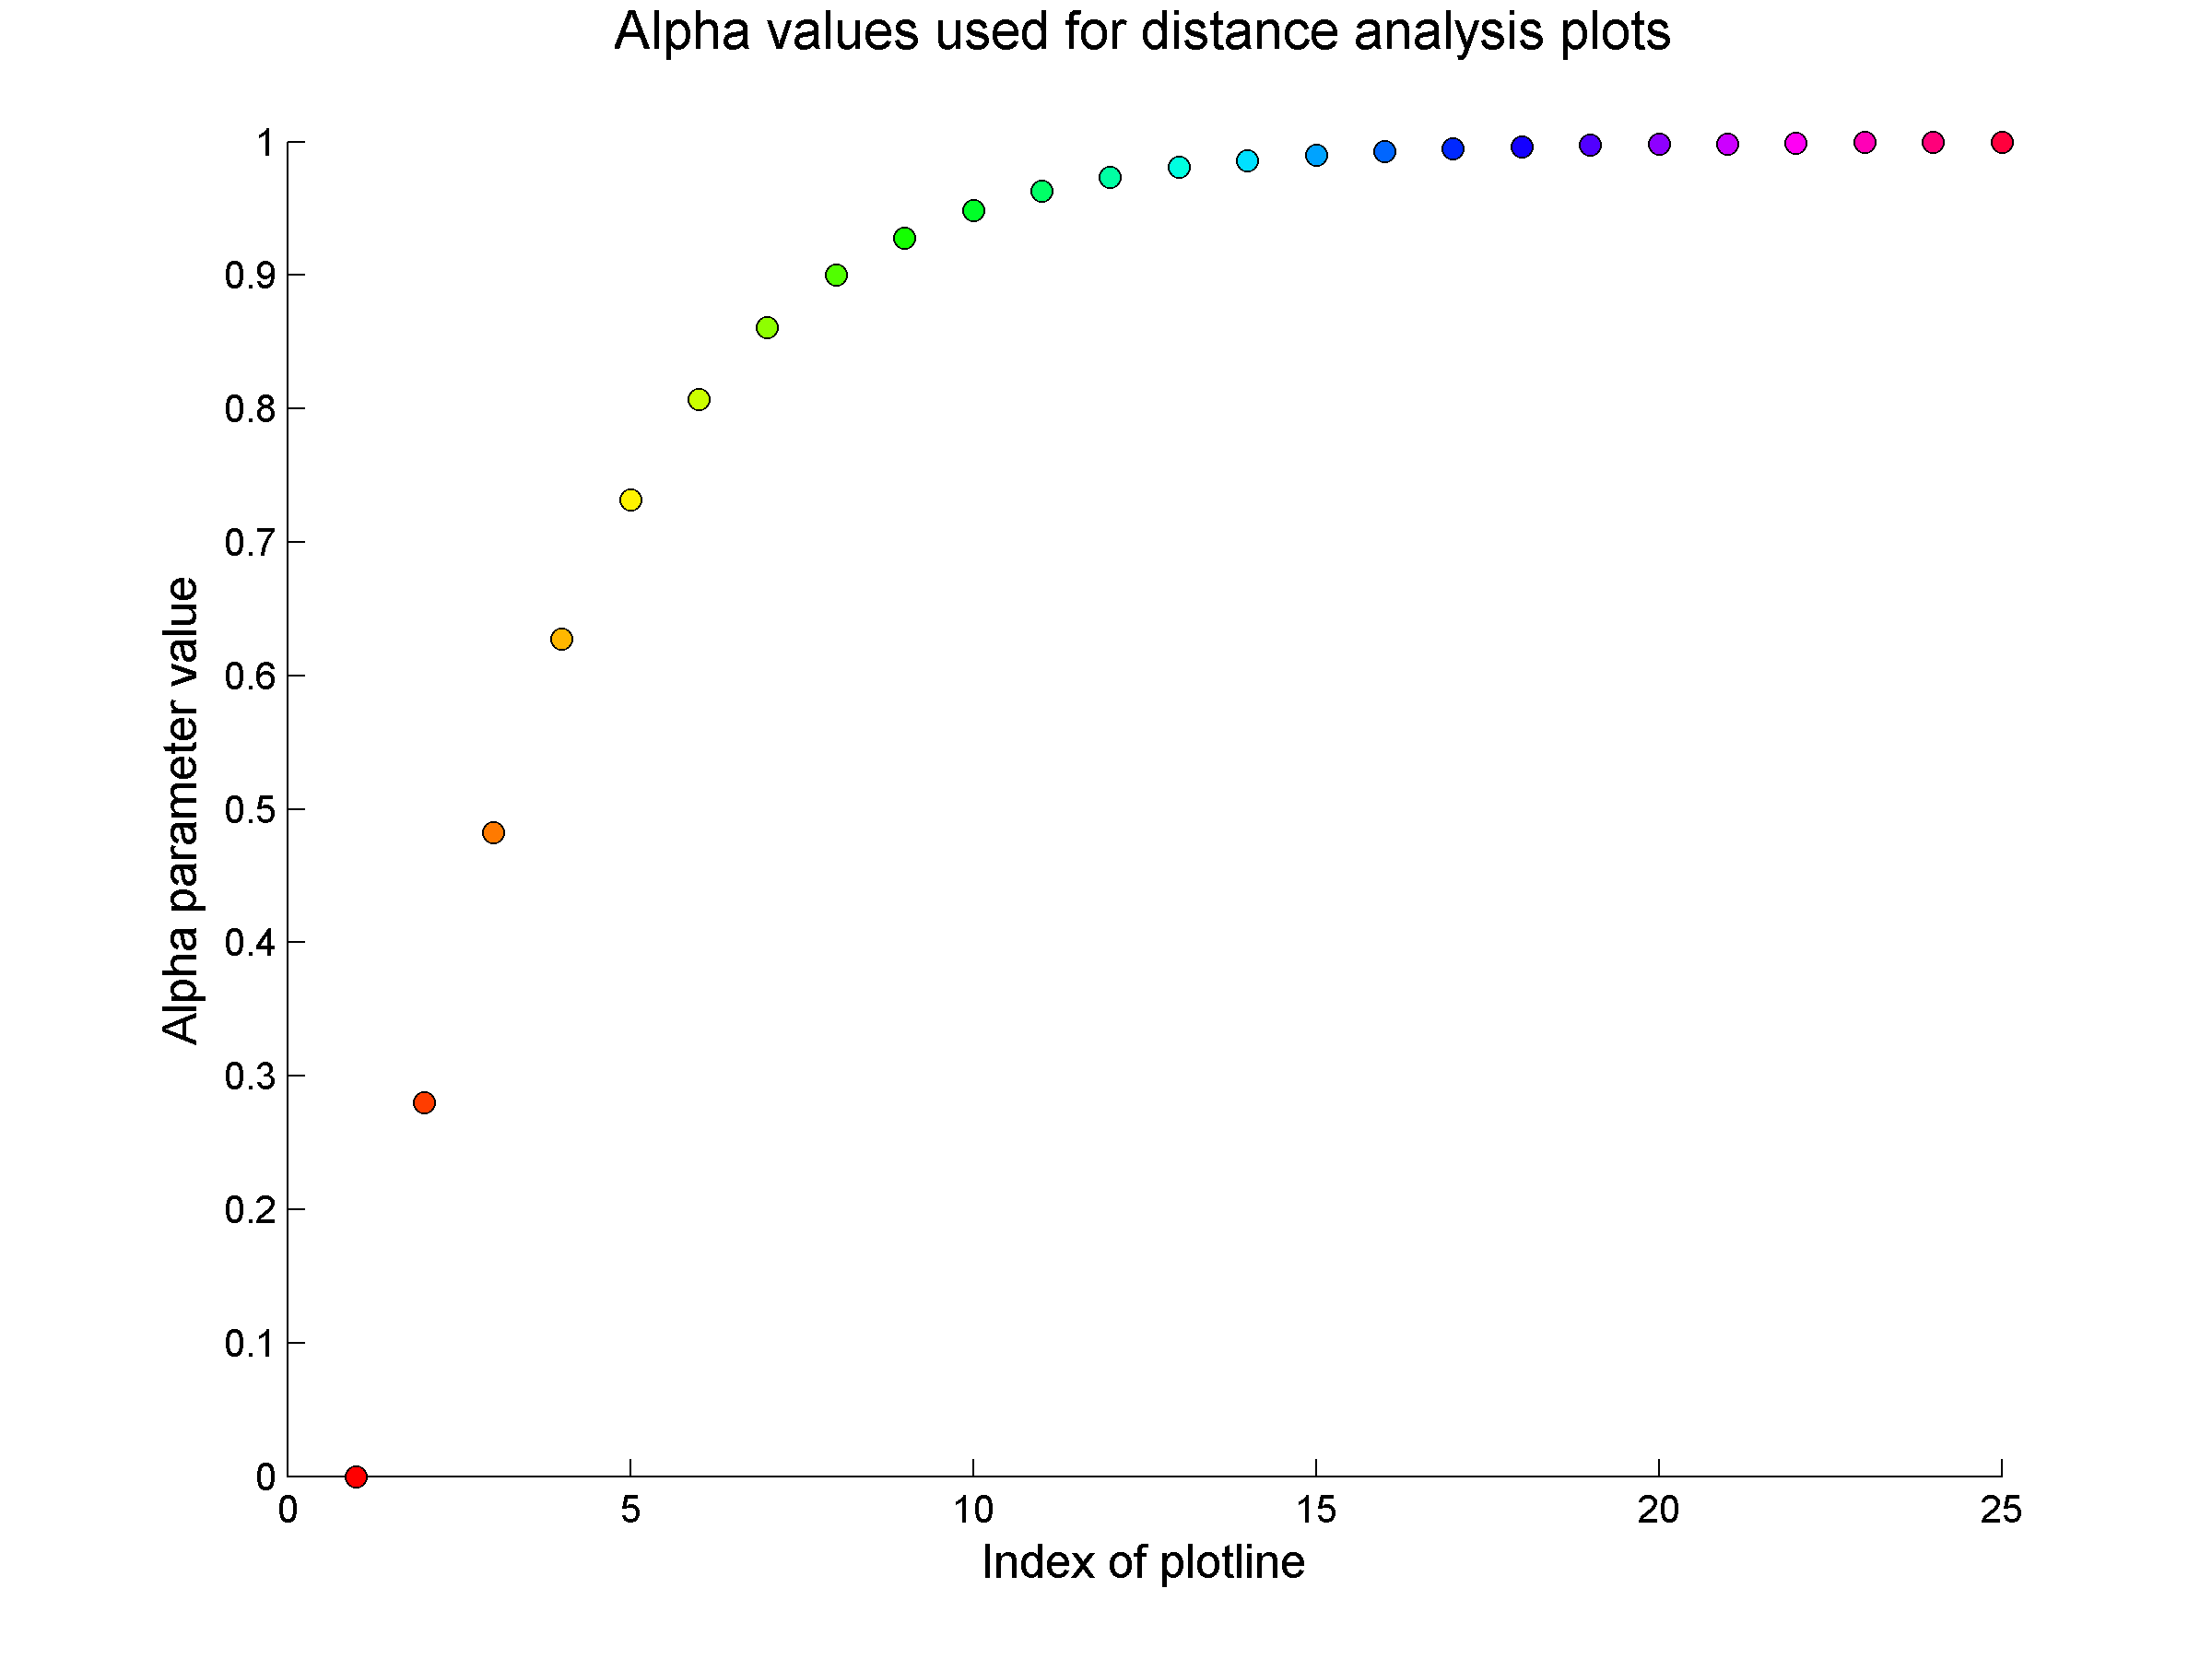 Values of the alpha parameter corresponding to the plots in the rest of this post